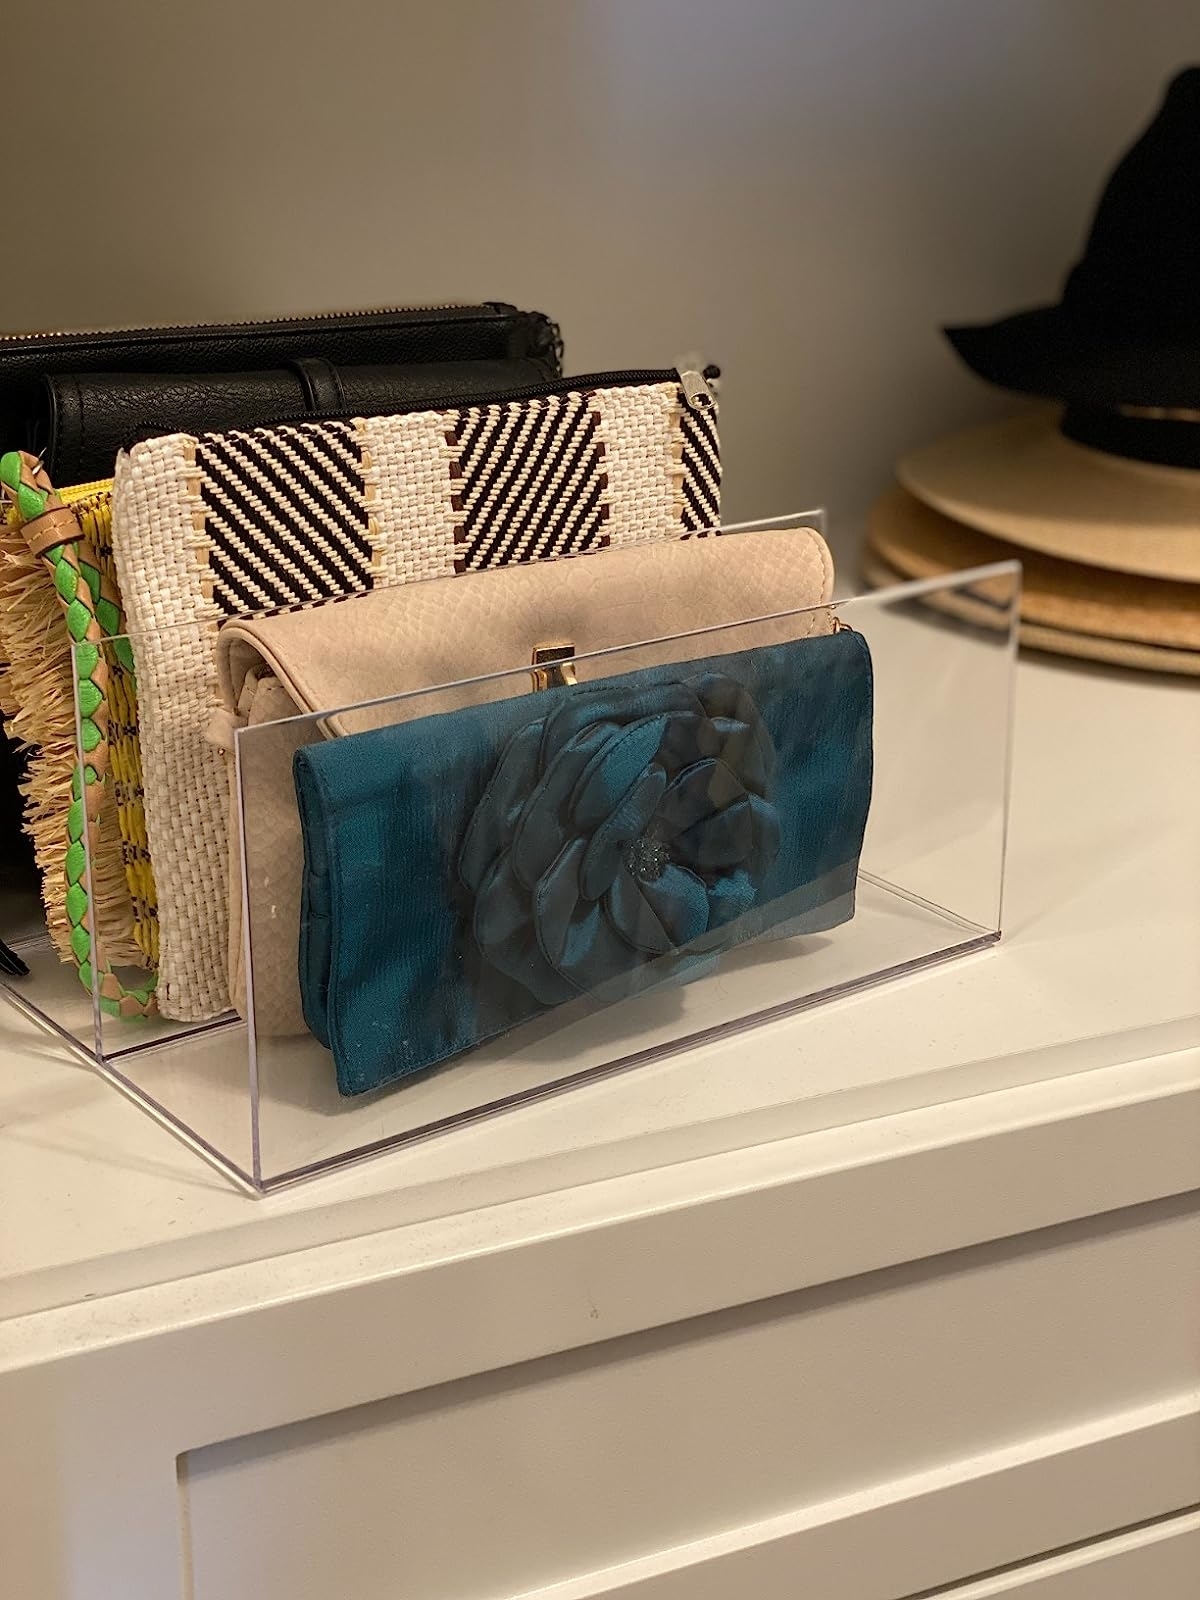 Reviewer image of clutch bags in the clear organizer